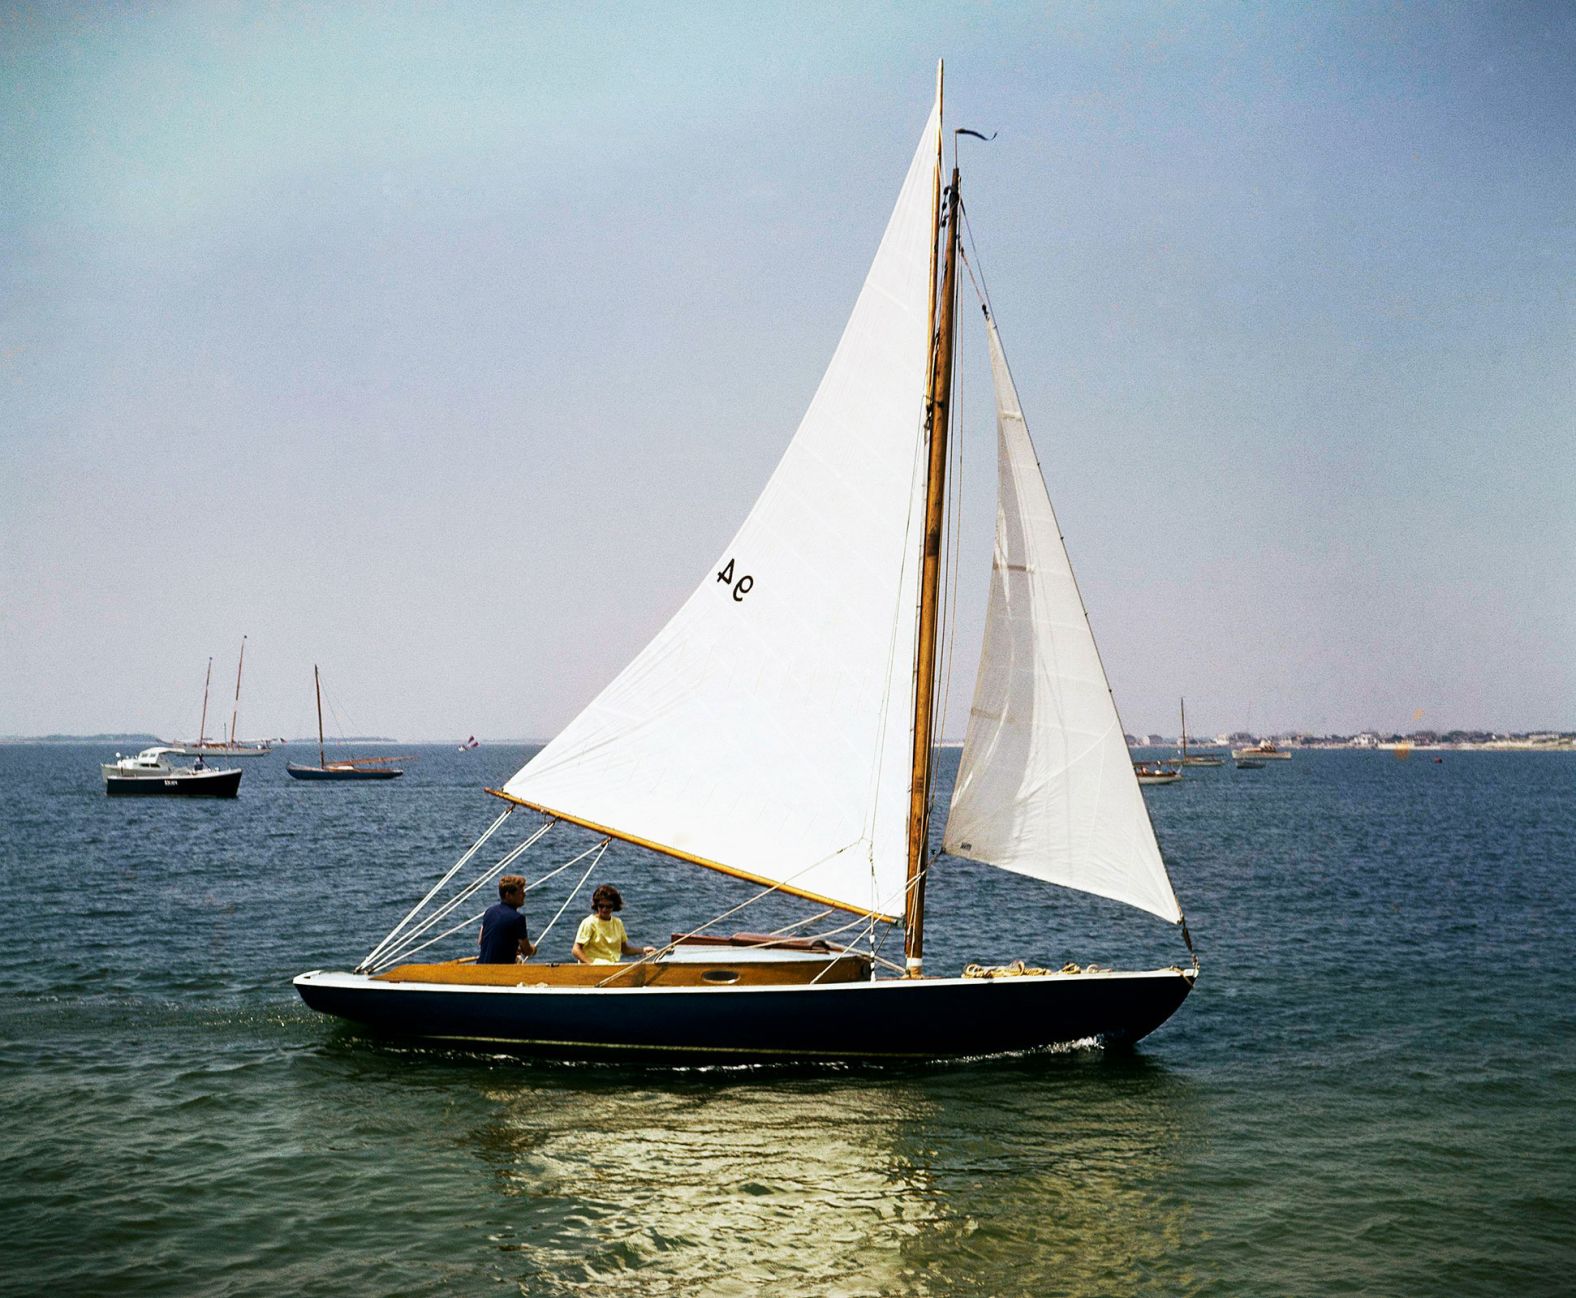 Kennedy and his wife, Jacqueline, go sailing in Hyannis Port in August 1960.